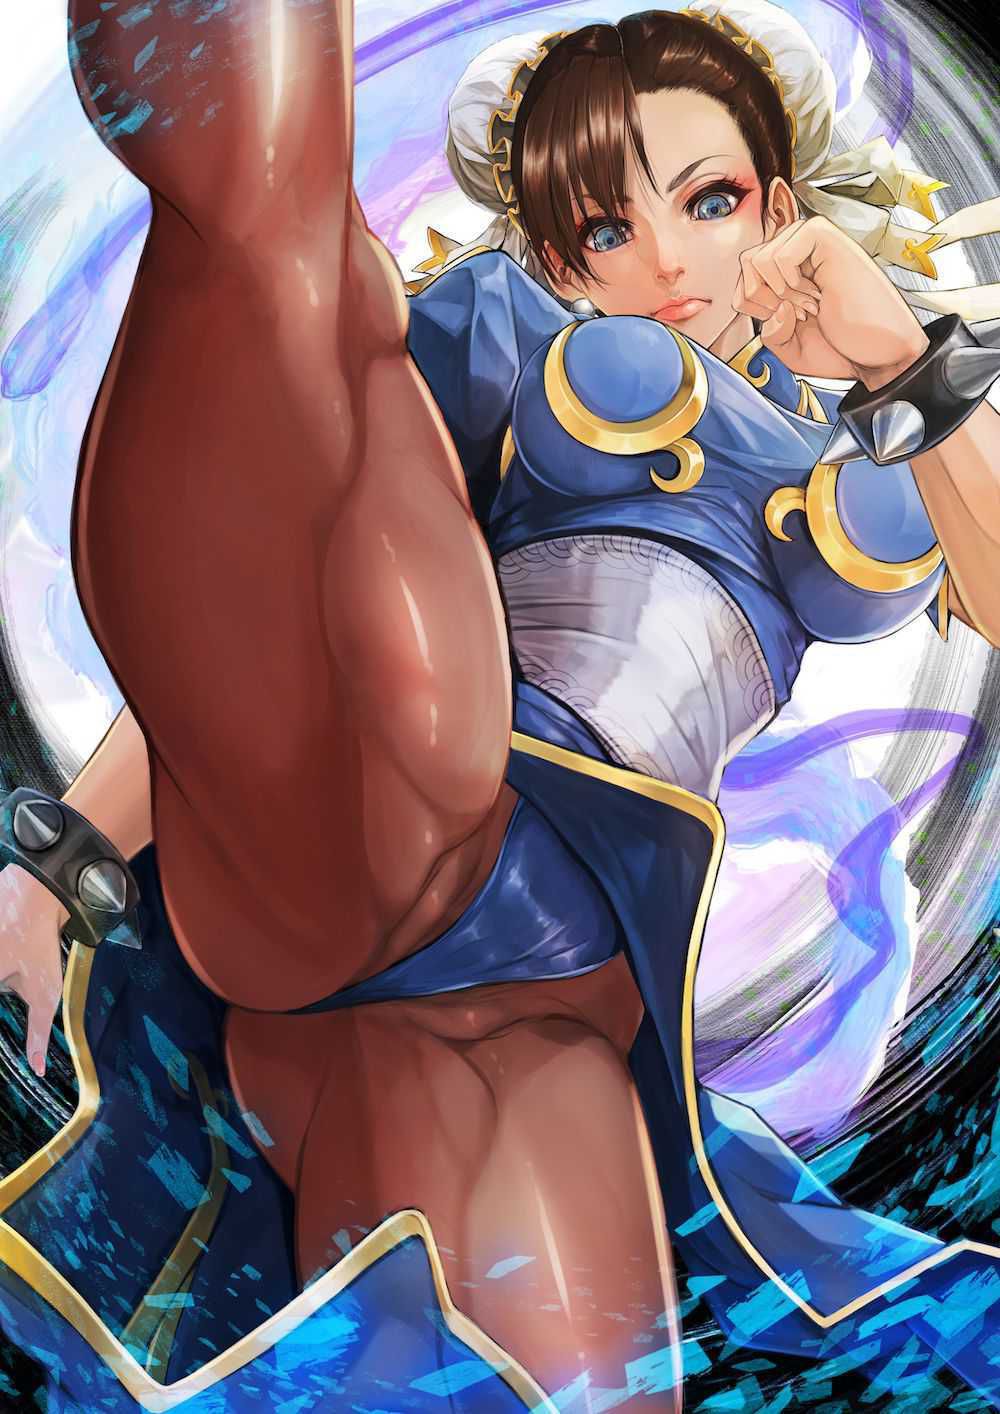 Chun-Li's lower body is curvy too and picture me [Street Fighter] 2